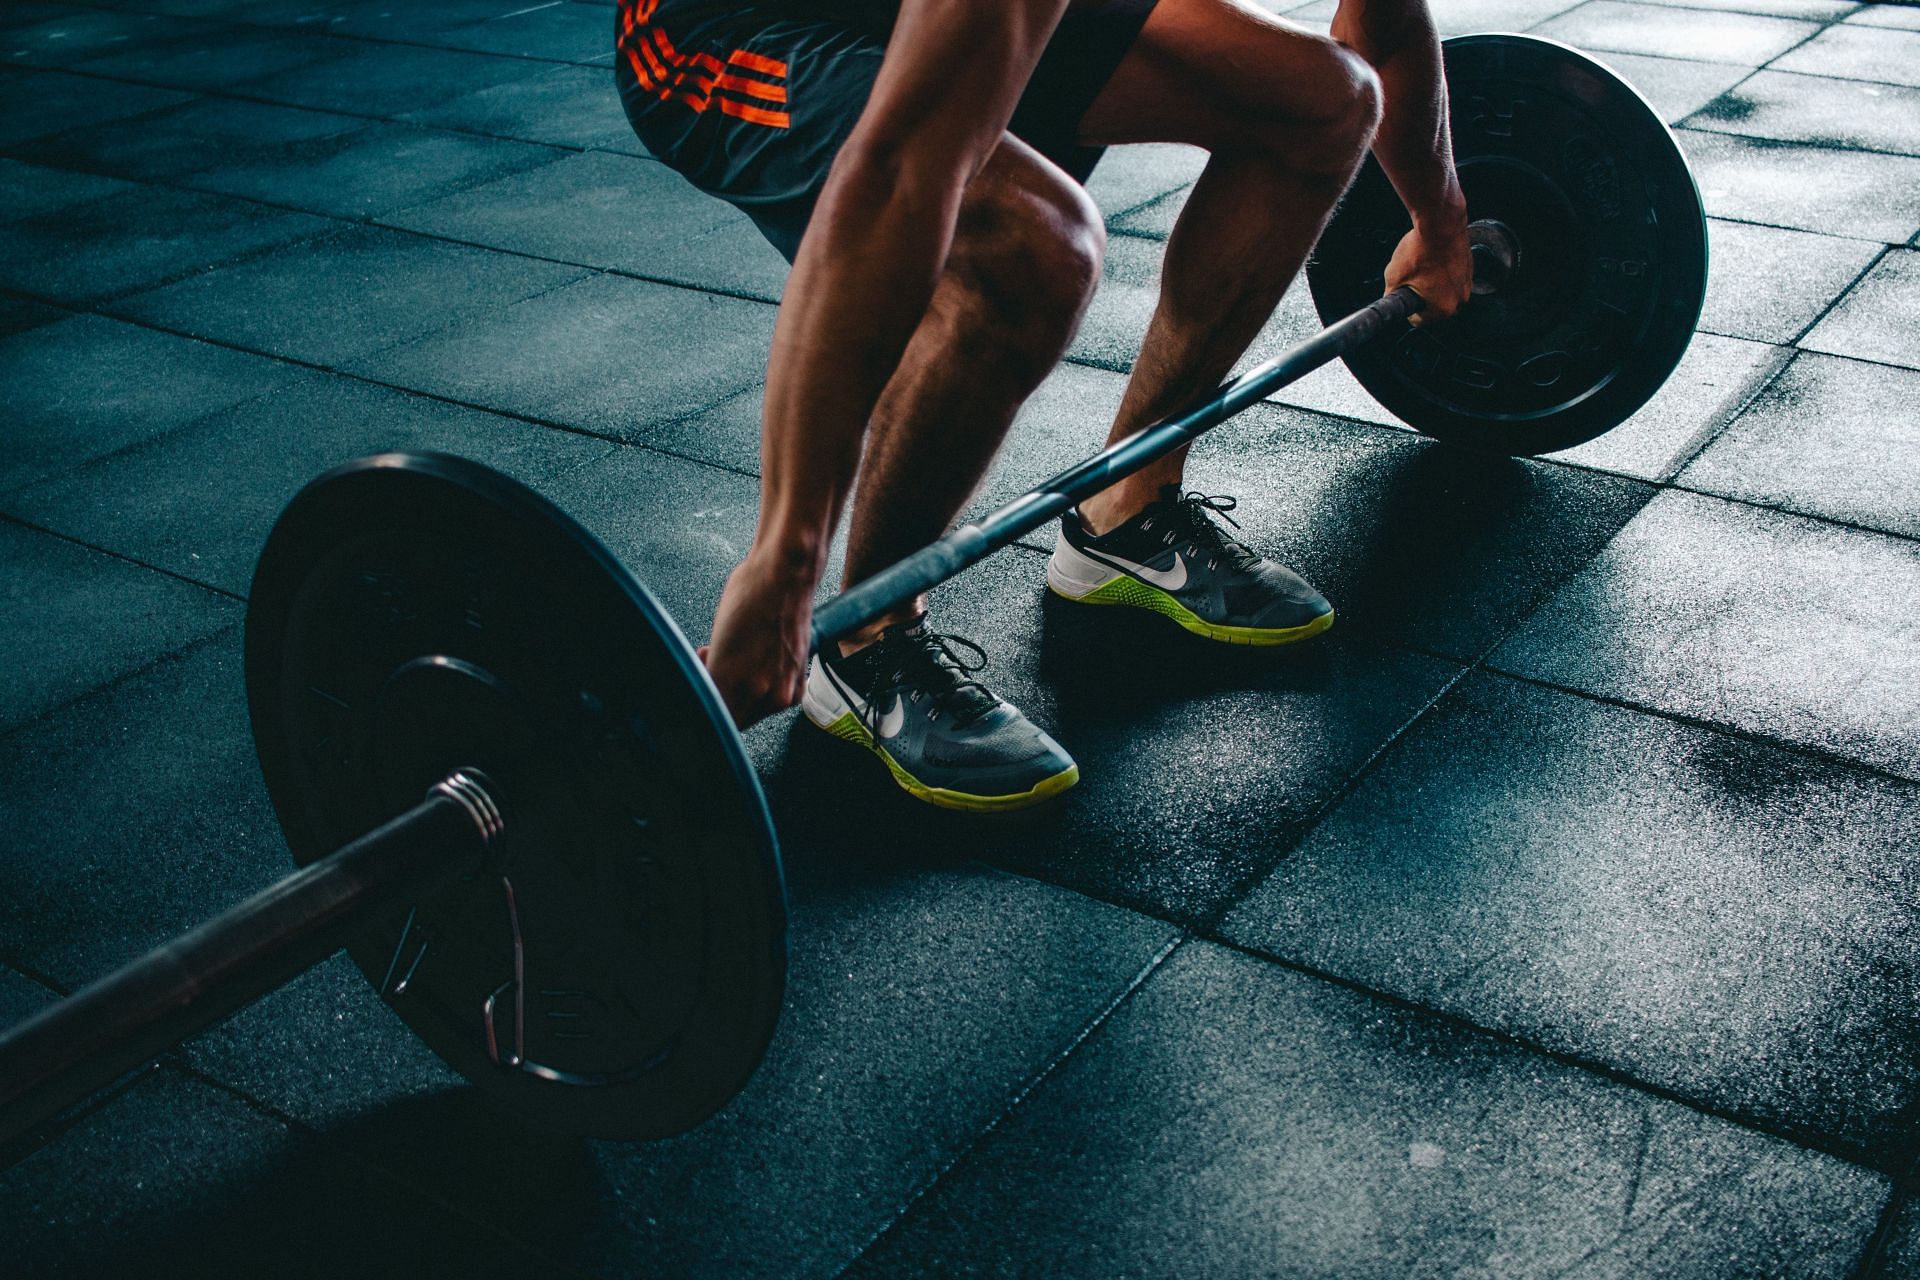 There are several exercises you can do in the gym as a beginner. (Image via unsplash/Victor Freitas)